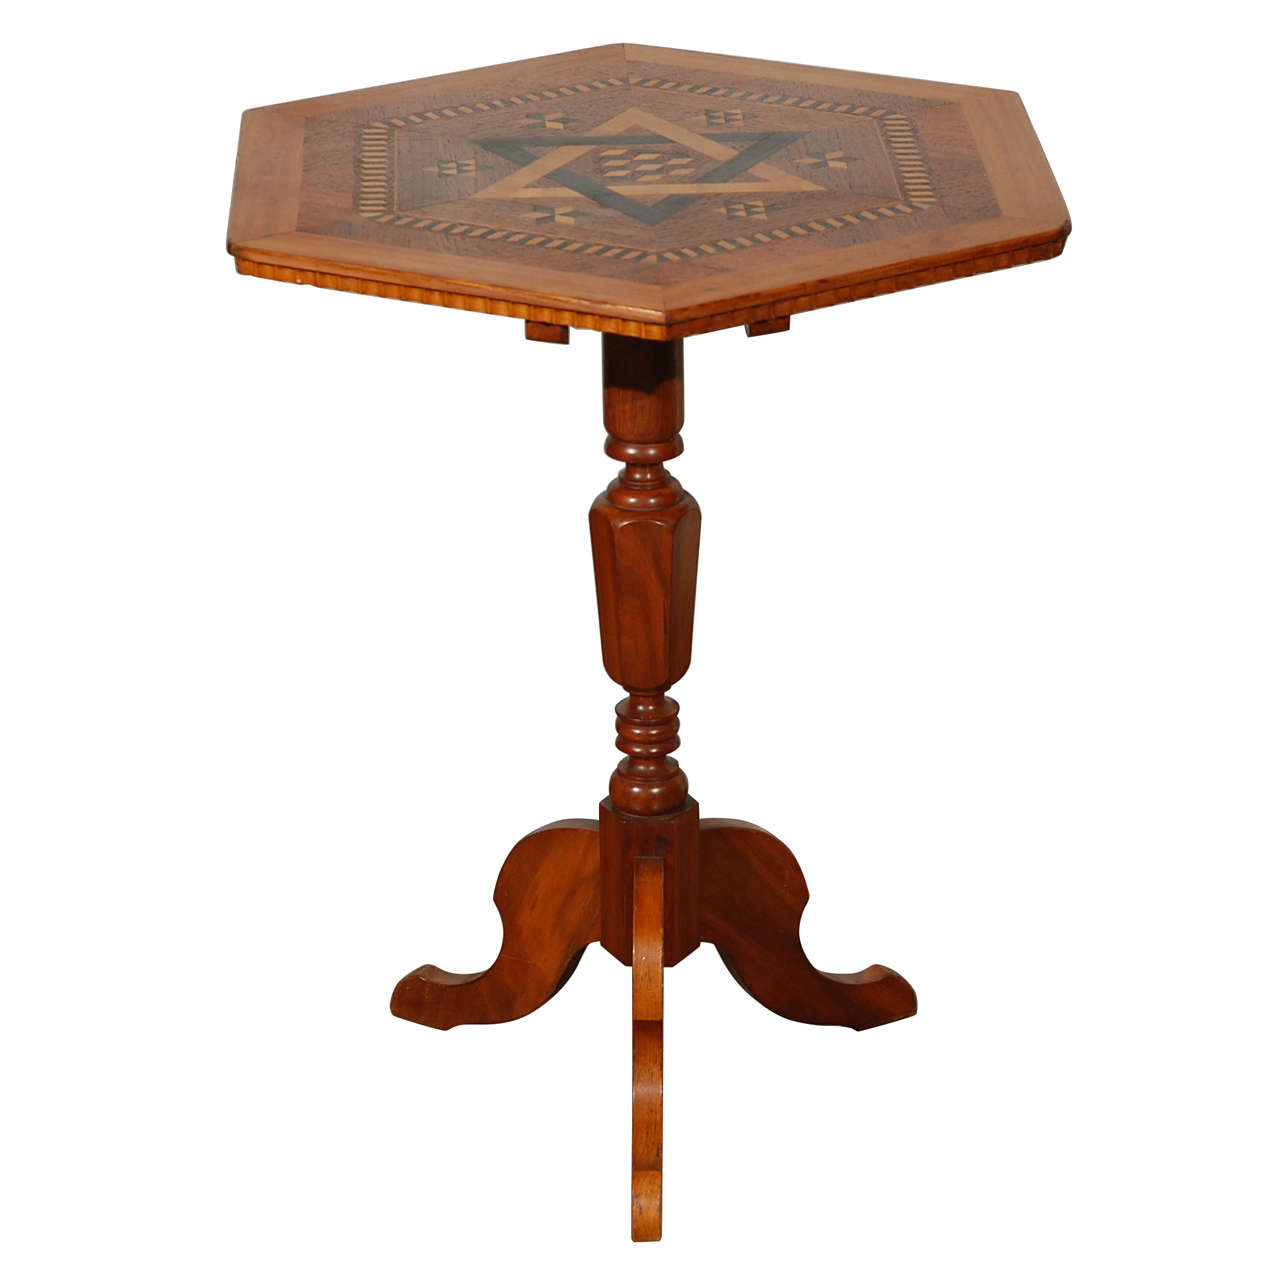 Antique Parquetry Top Game Table or Candle Stand at 1stdibs